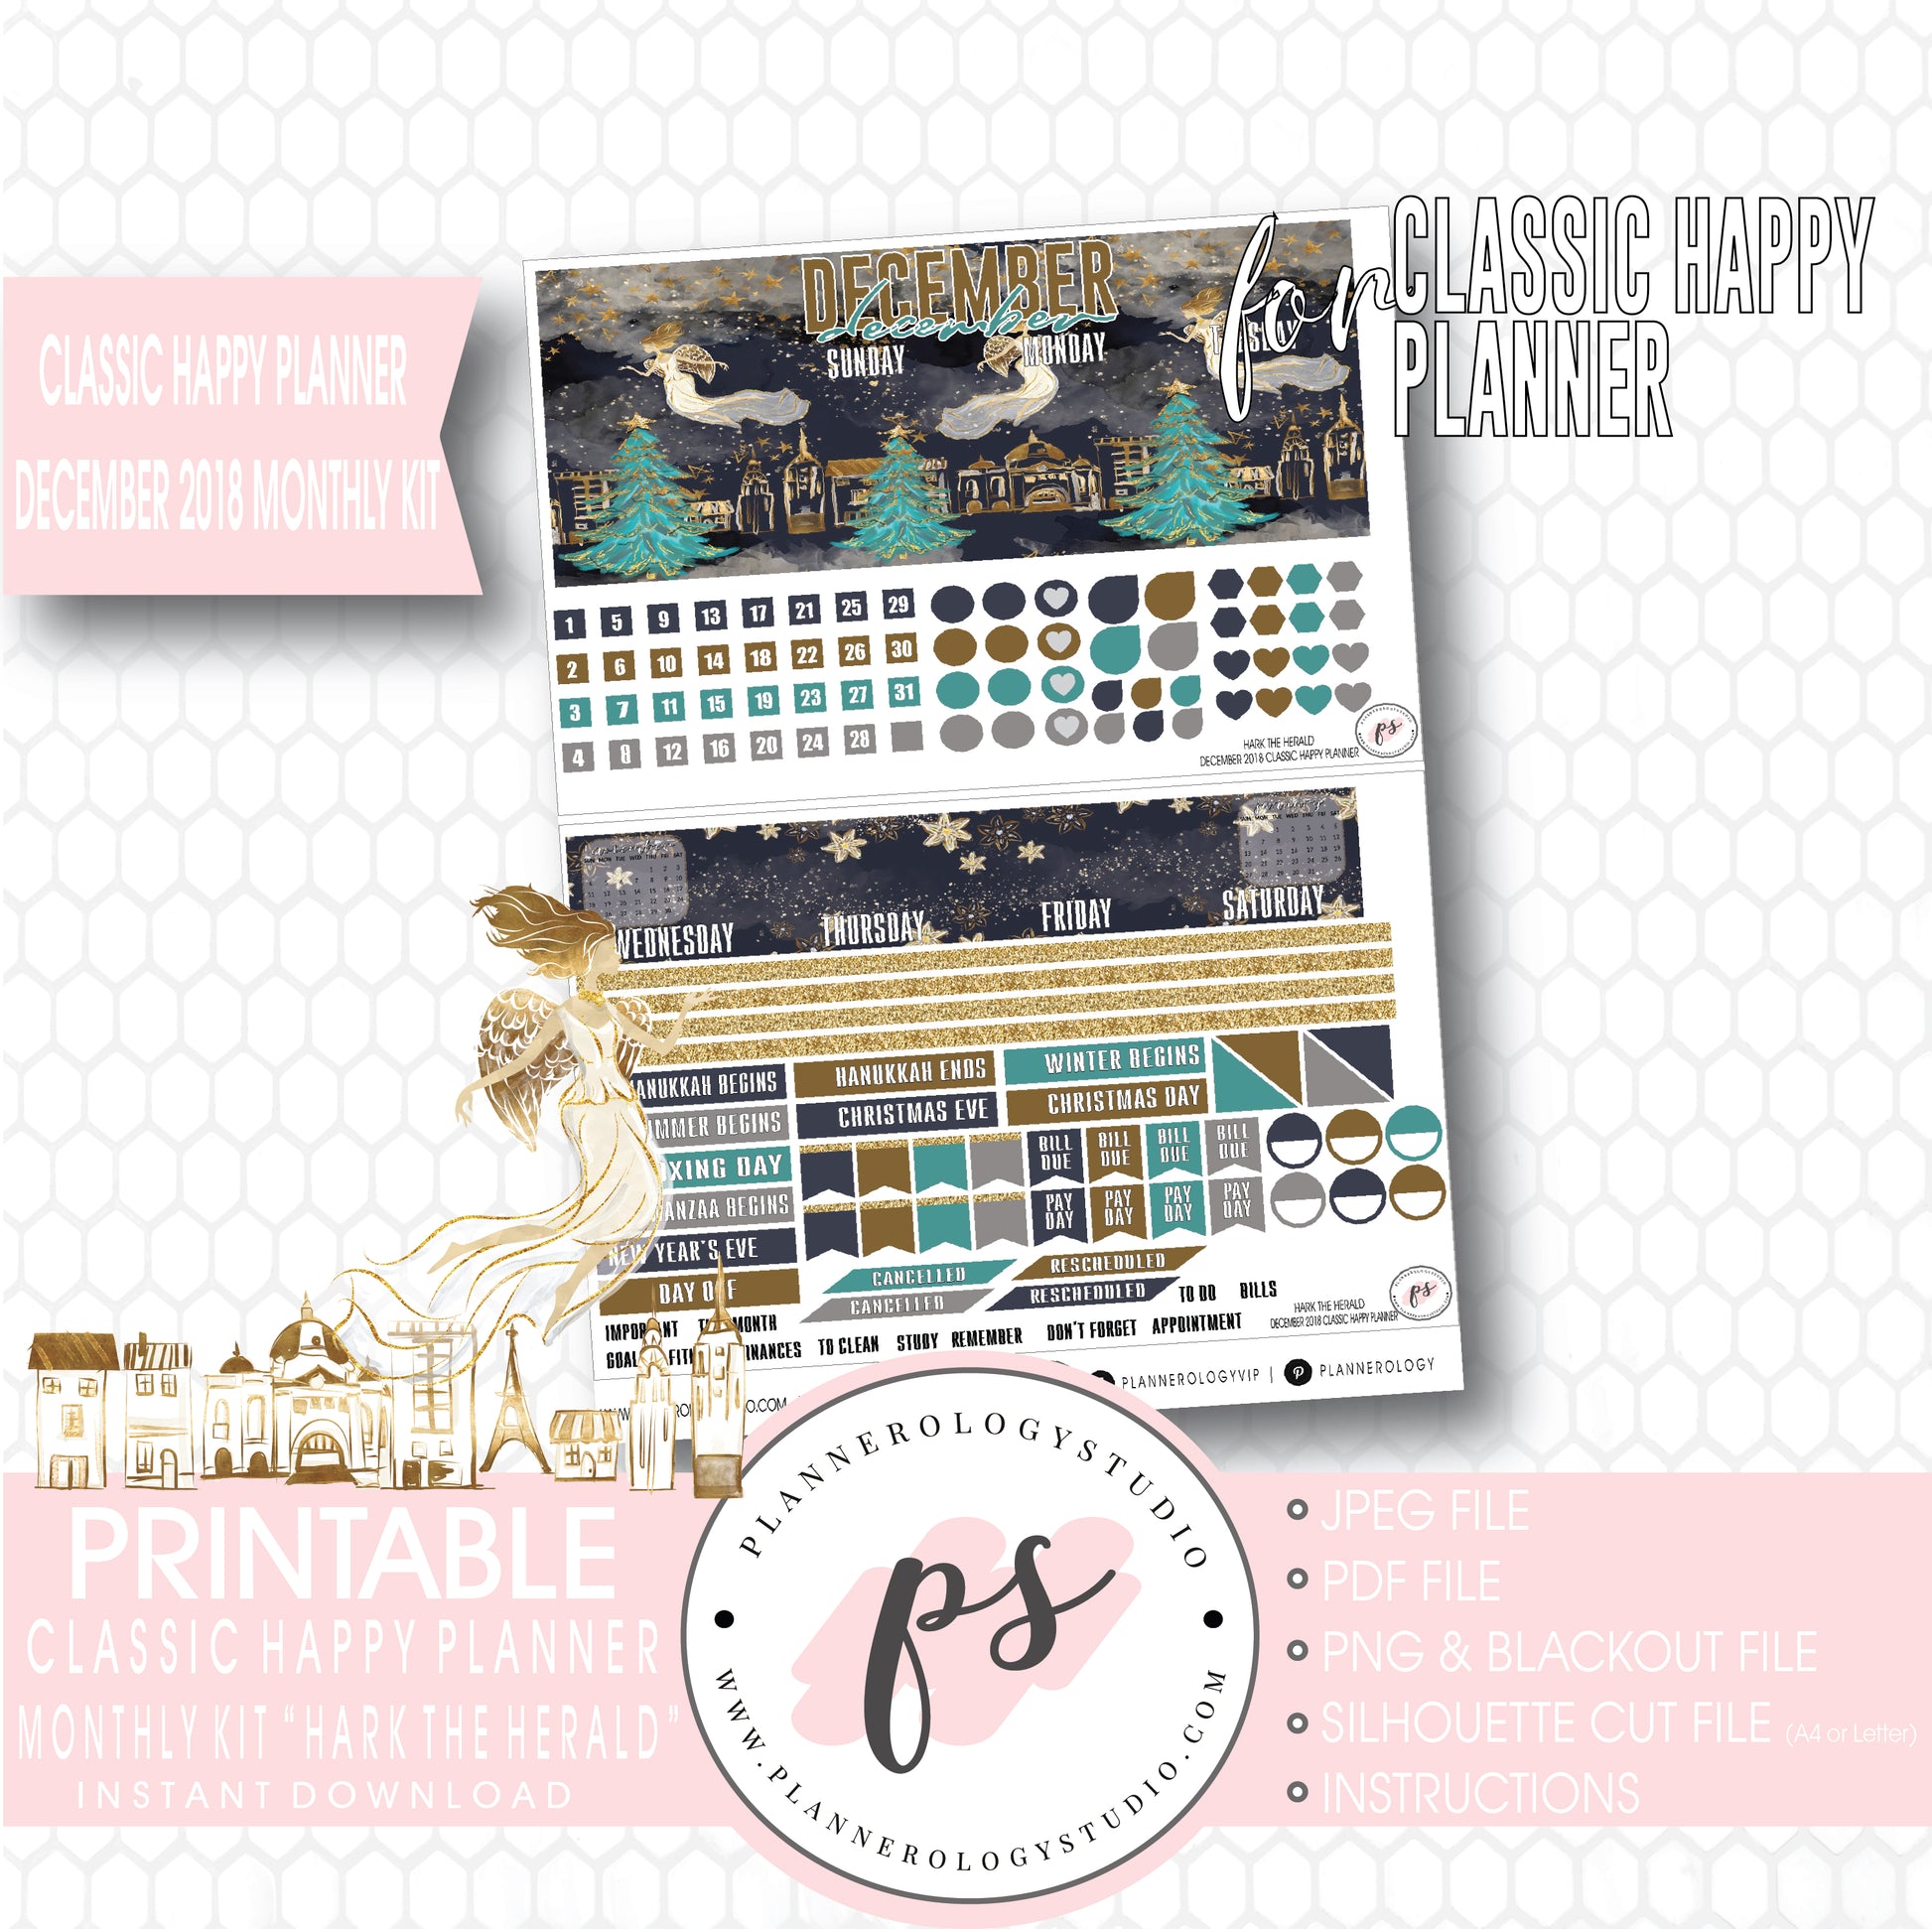 Hark the Herald Christmas December 2018 Monthly View Kit Printable Planner Stickers (for use with Classic Happy Planner) - Plannerologystudio